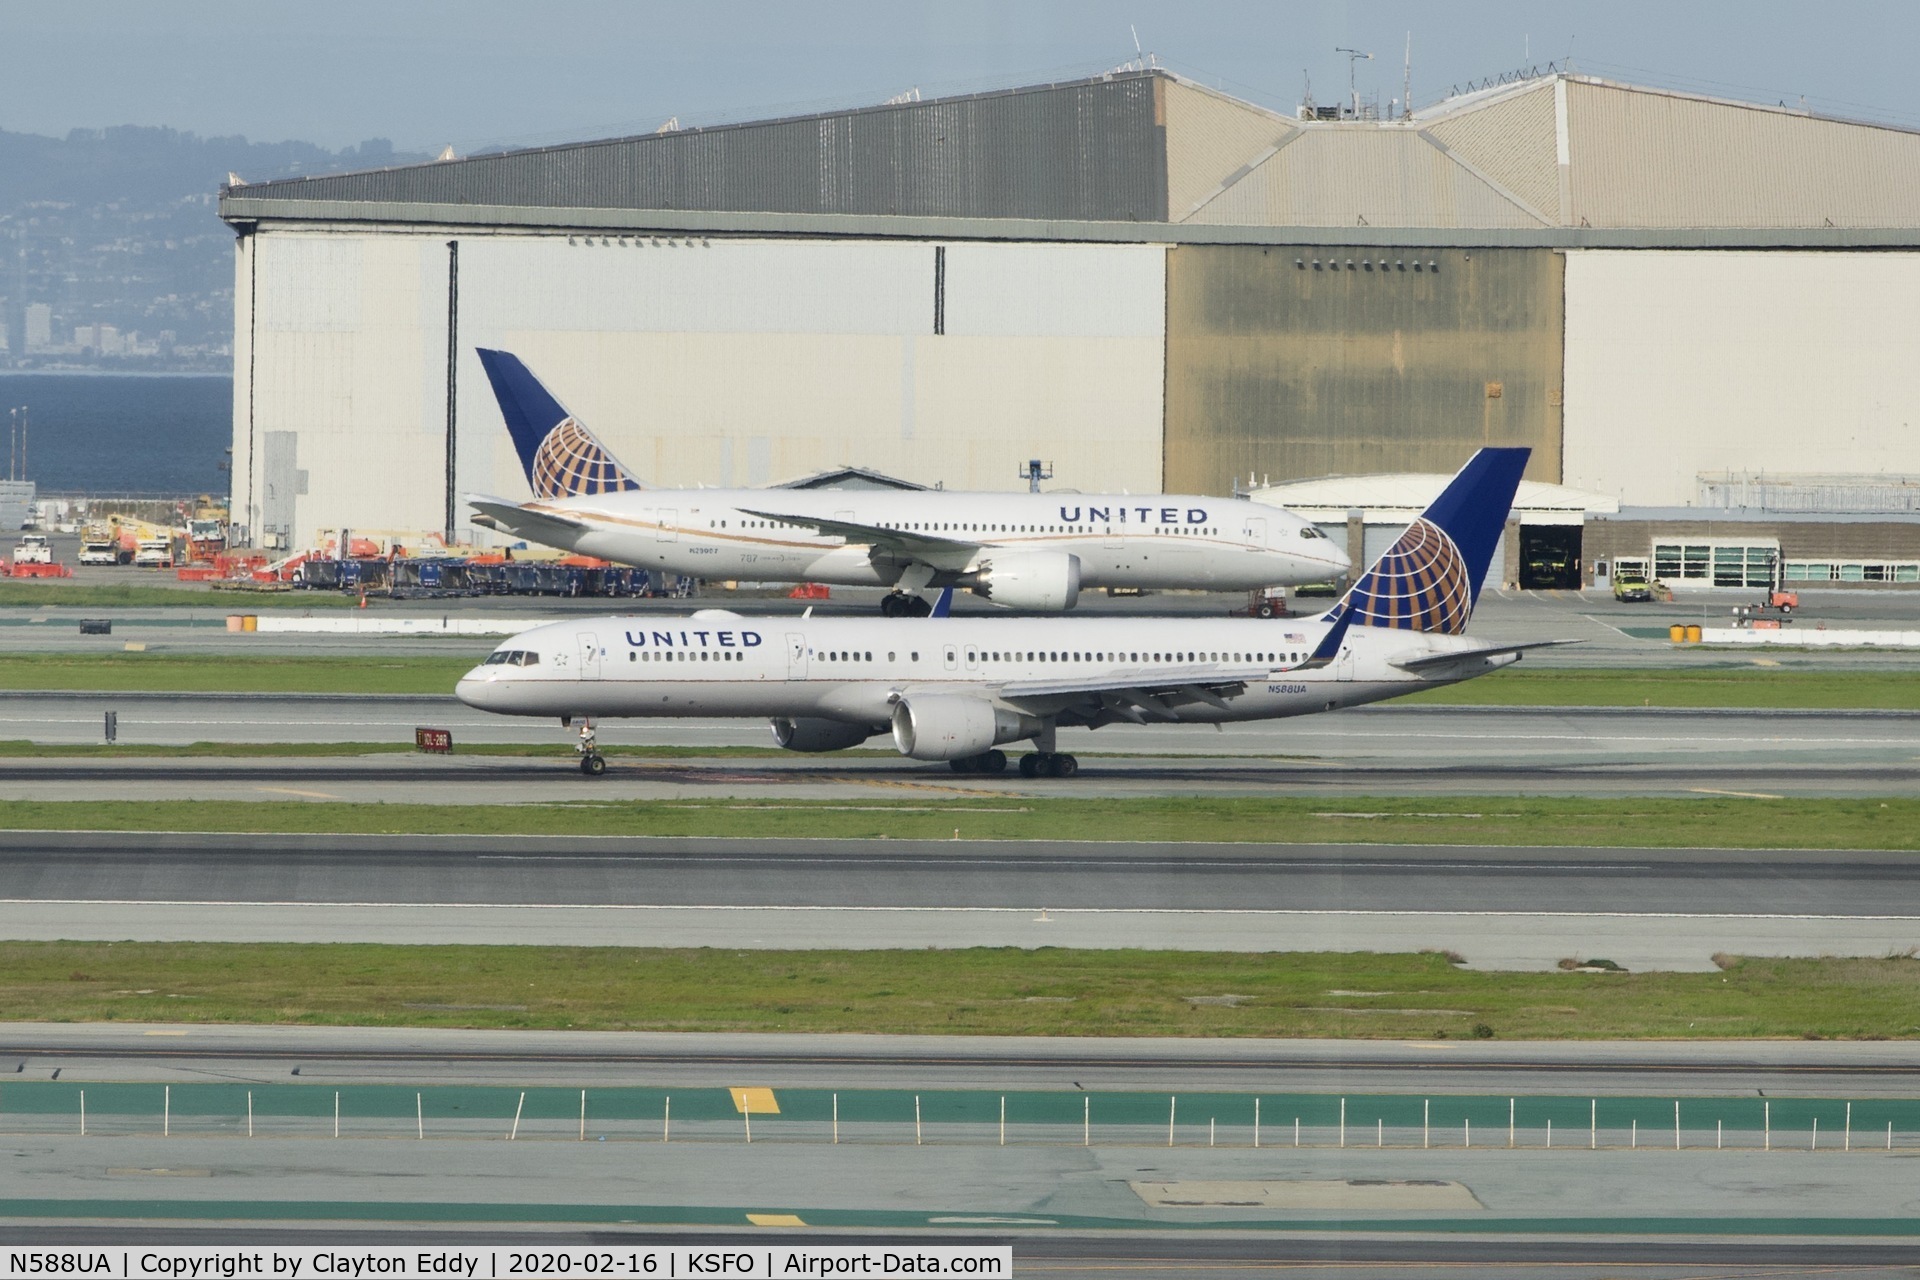 N588UA, 1993 Boeing 757-222 C/N 26717, Pic taken from new observation deck. SFO. 2020.